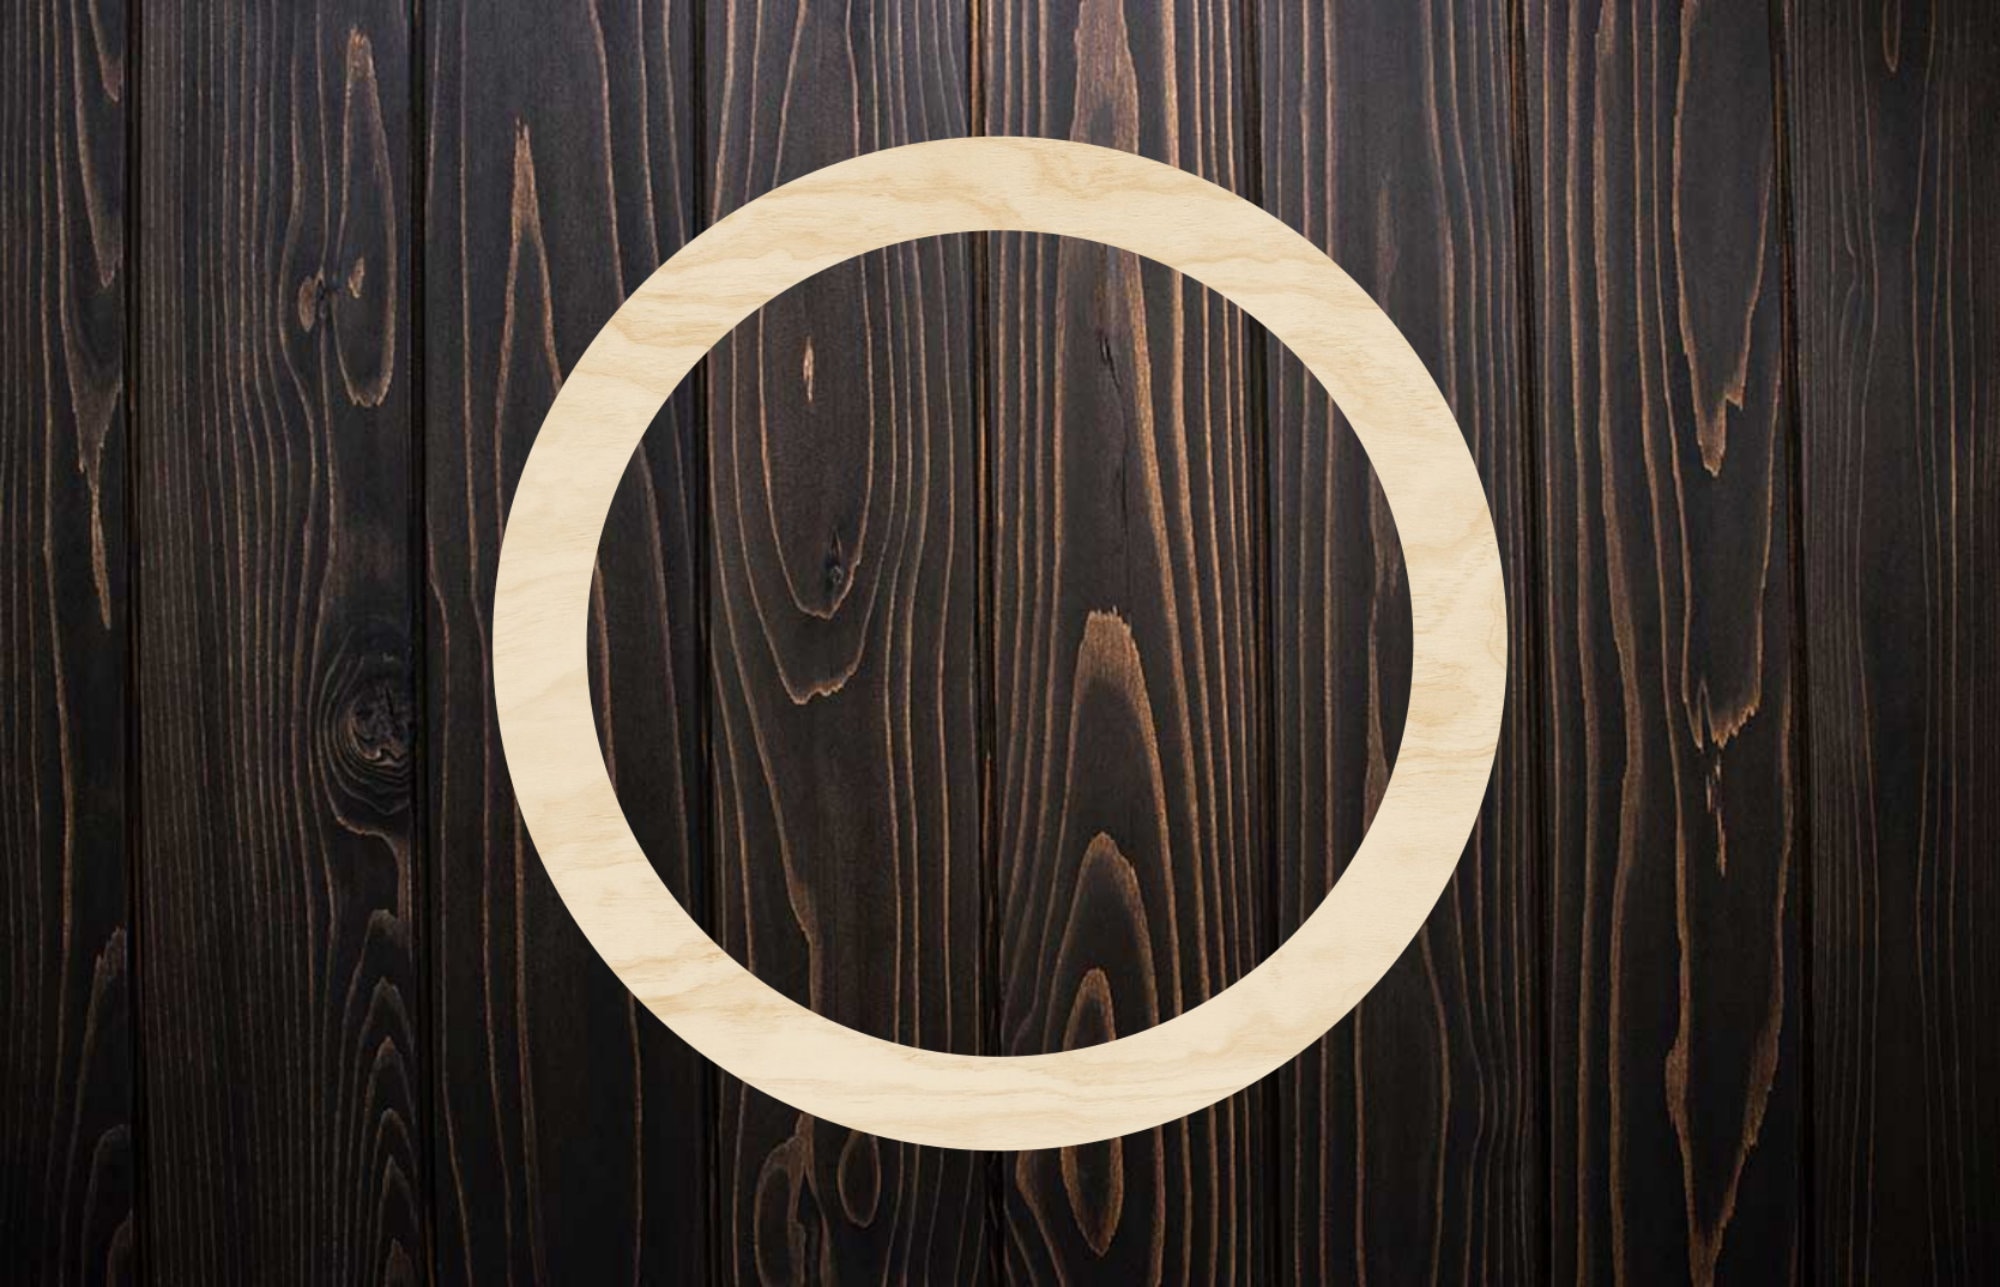 12 Inch Wood Circles for Crafts, 5Pcs Unfinished Wood Crafts, DIY Wood  Rounds for Cricut Projects, Door Hanger, Wood Burning, Painting, Halloween